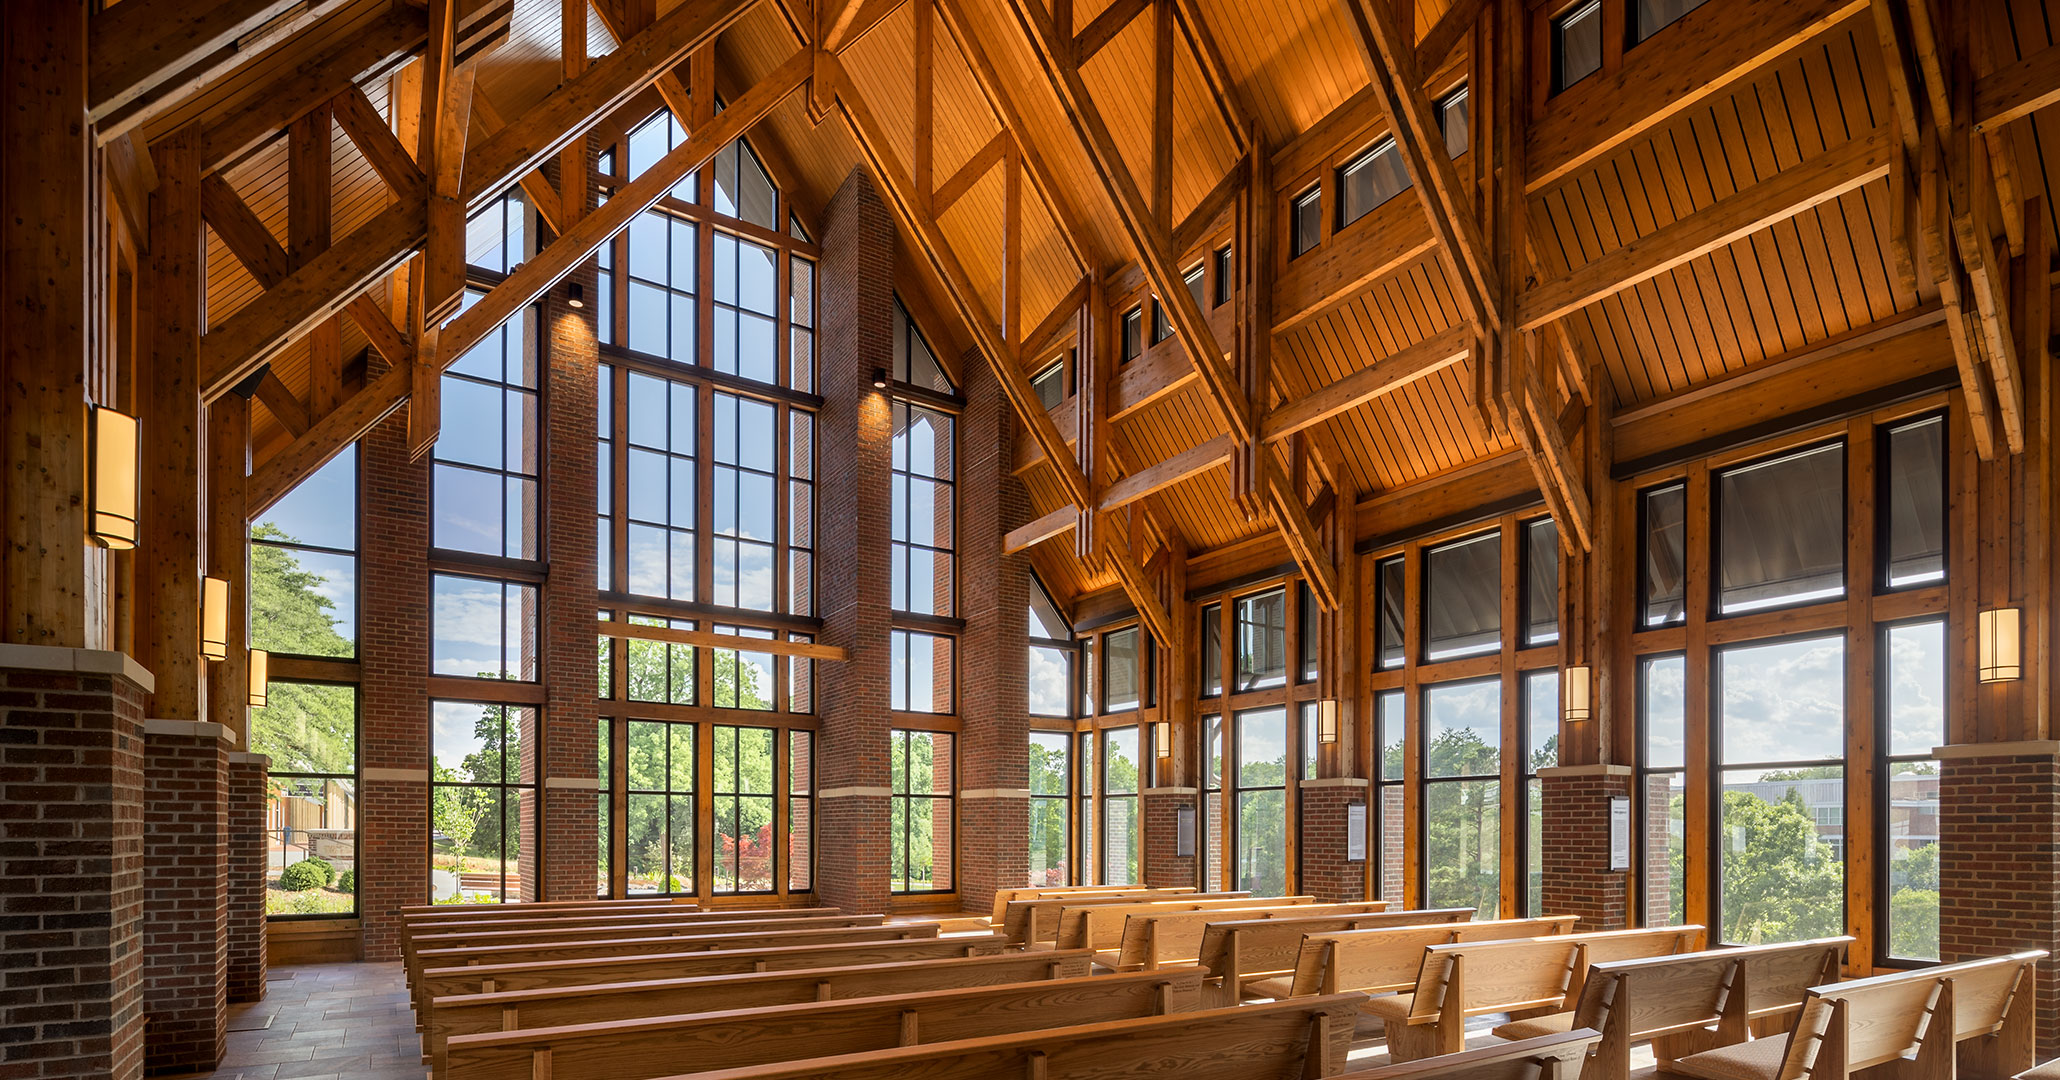 Clemson University’s new Chapel utilizes natural materials and an expressive wood structure to create a welcome place.